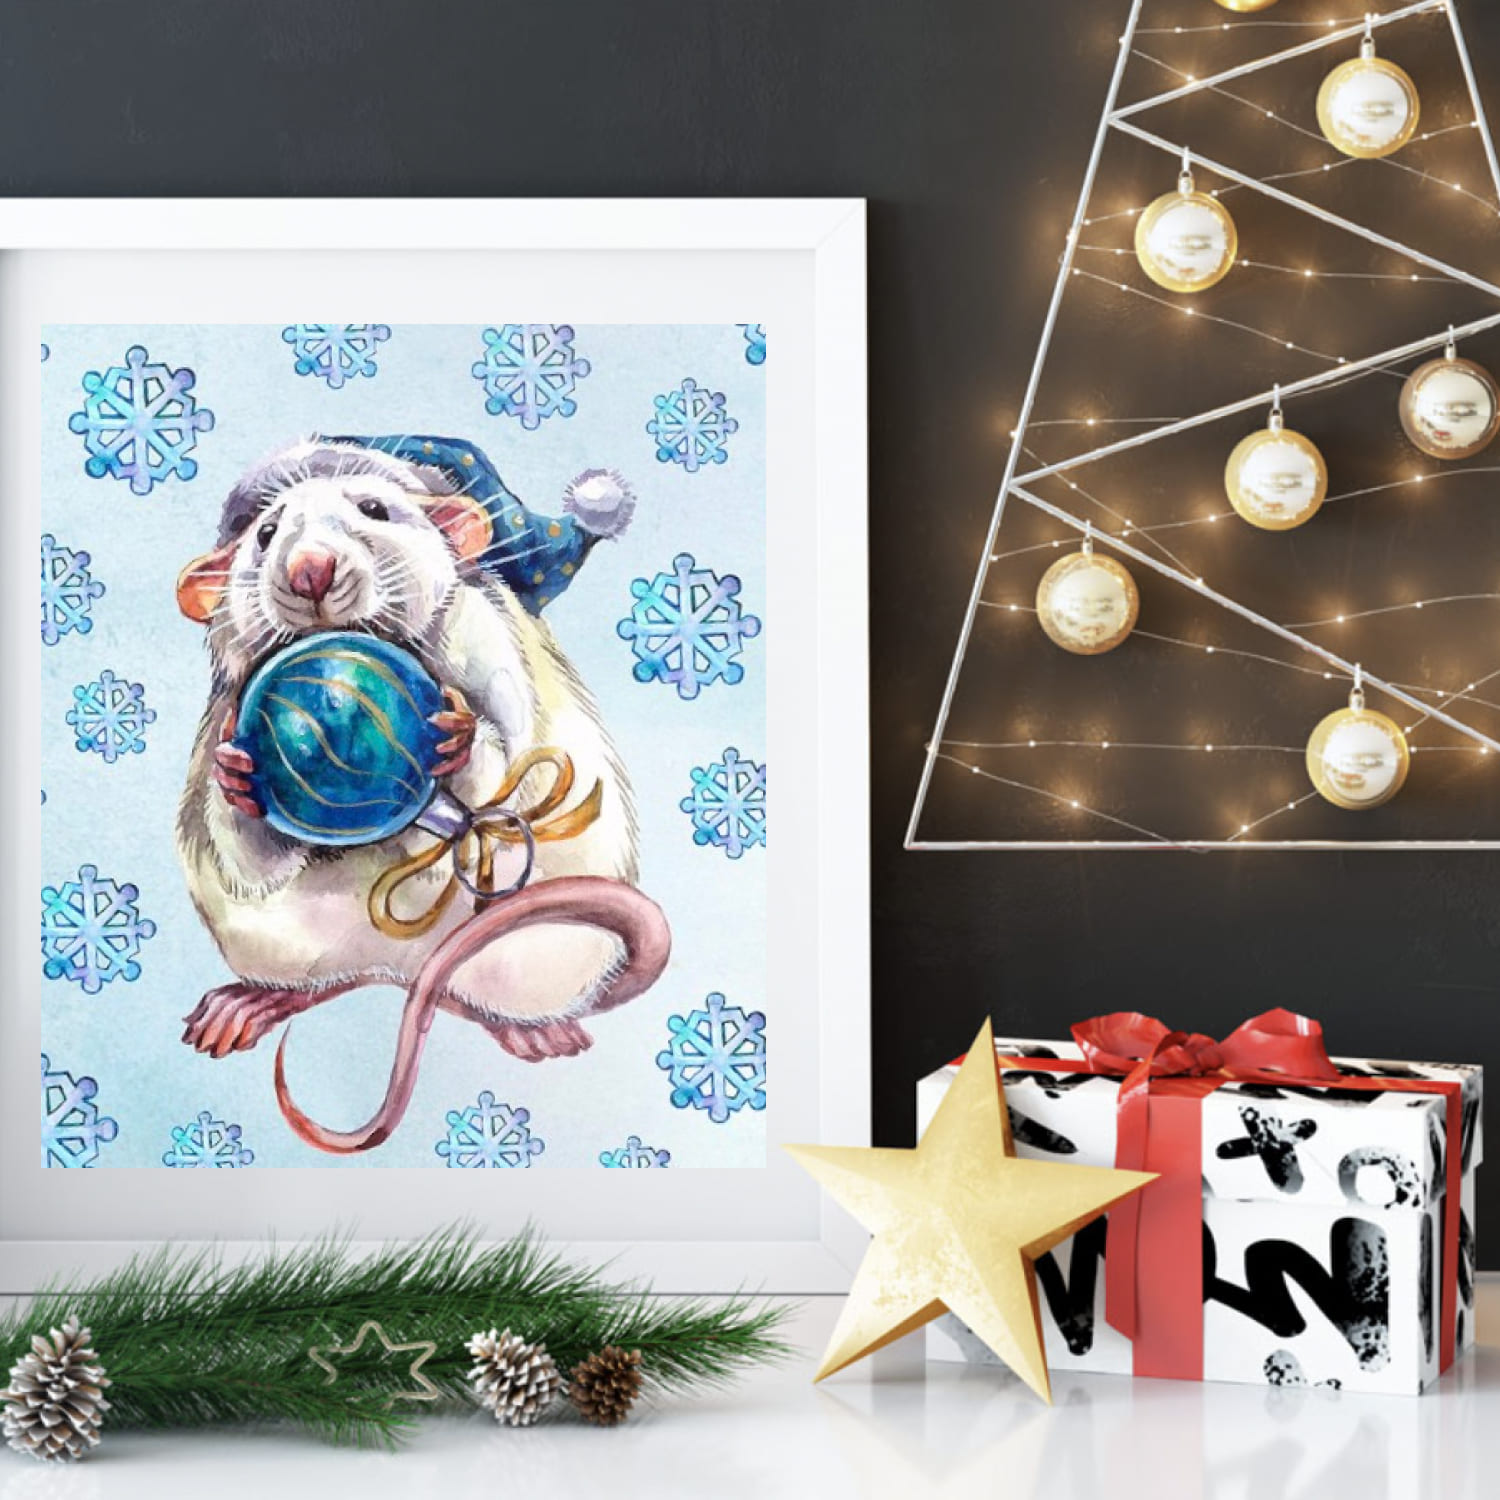 It is perfect for Christmas design, printing on fabric, greeting cards, gift tags, notebooks, posters and etc.